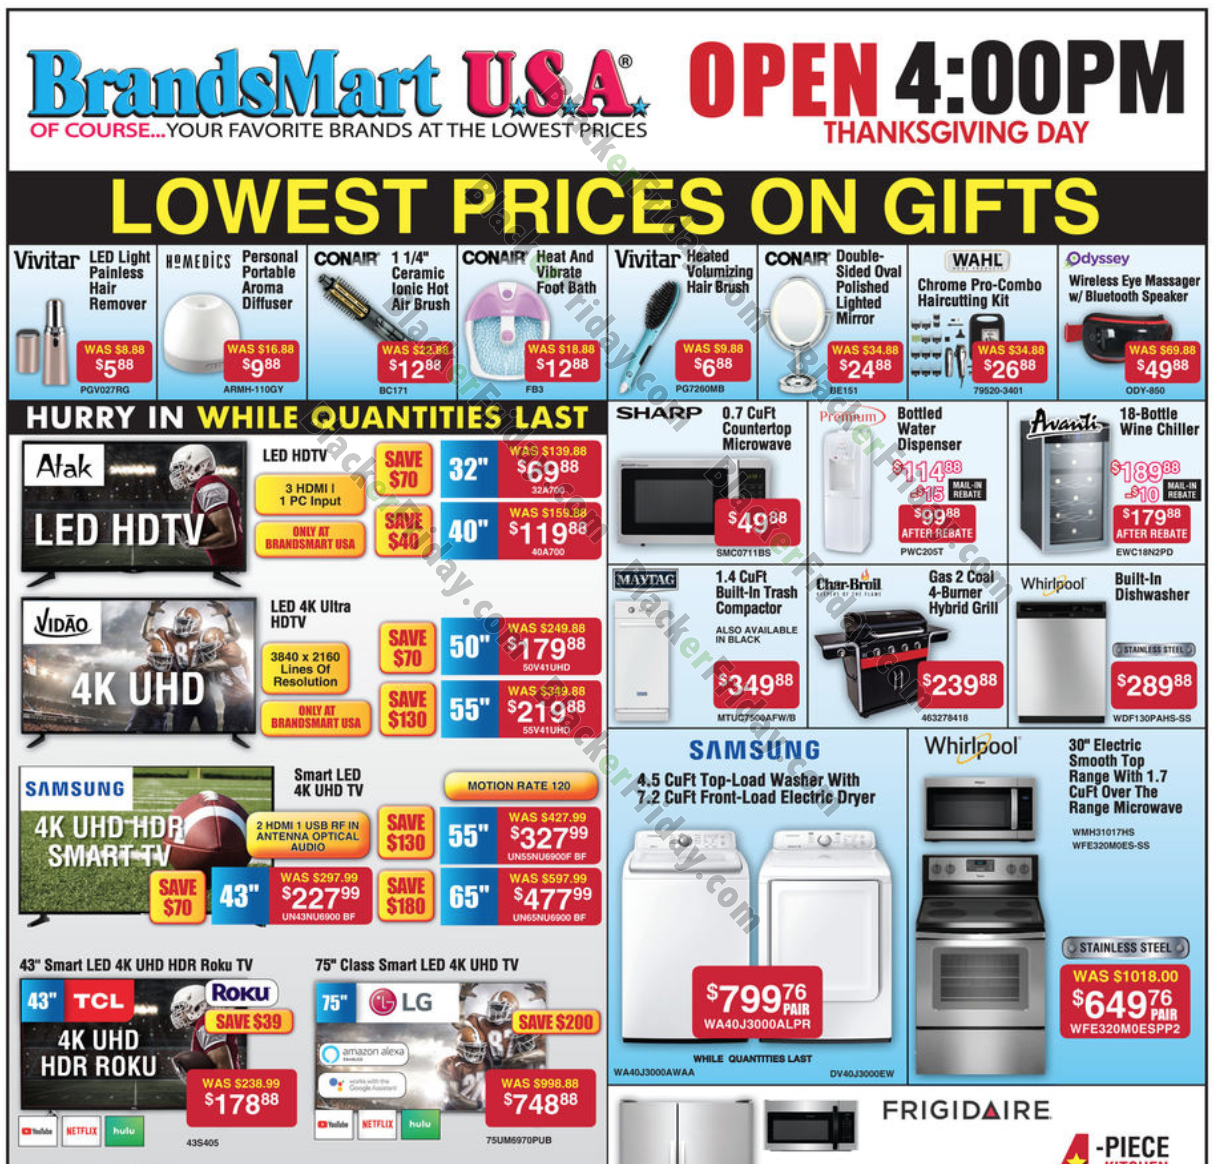 brandsmart-usa-black-friday-2021-sale-what-to-expect-blacker-friday